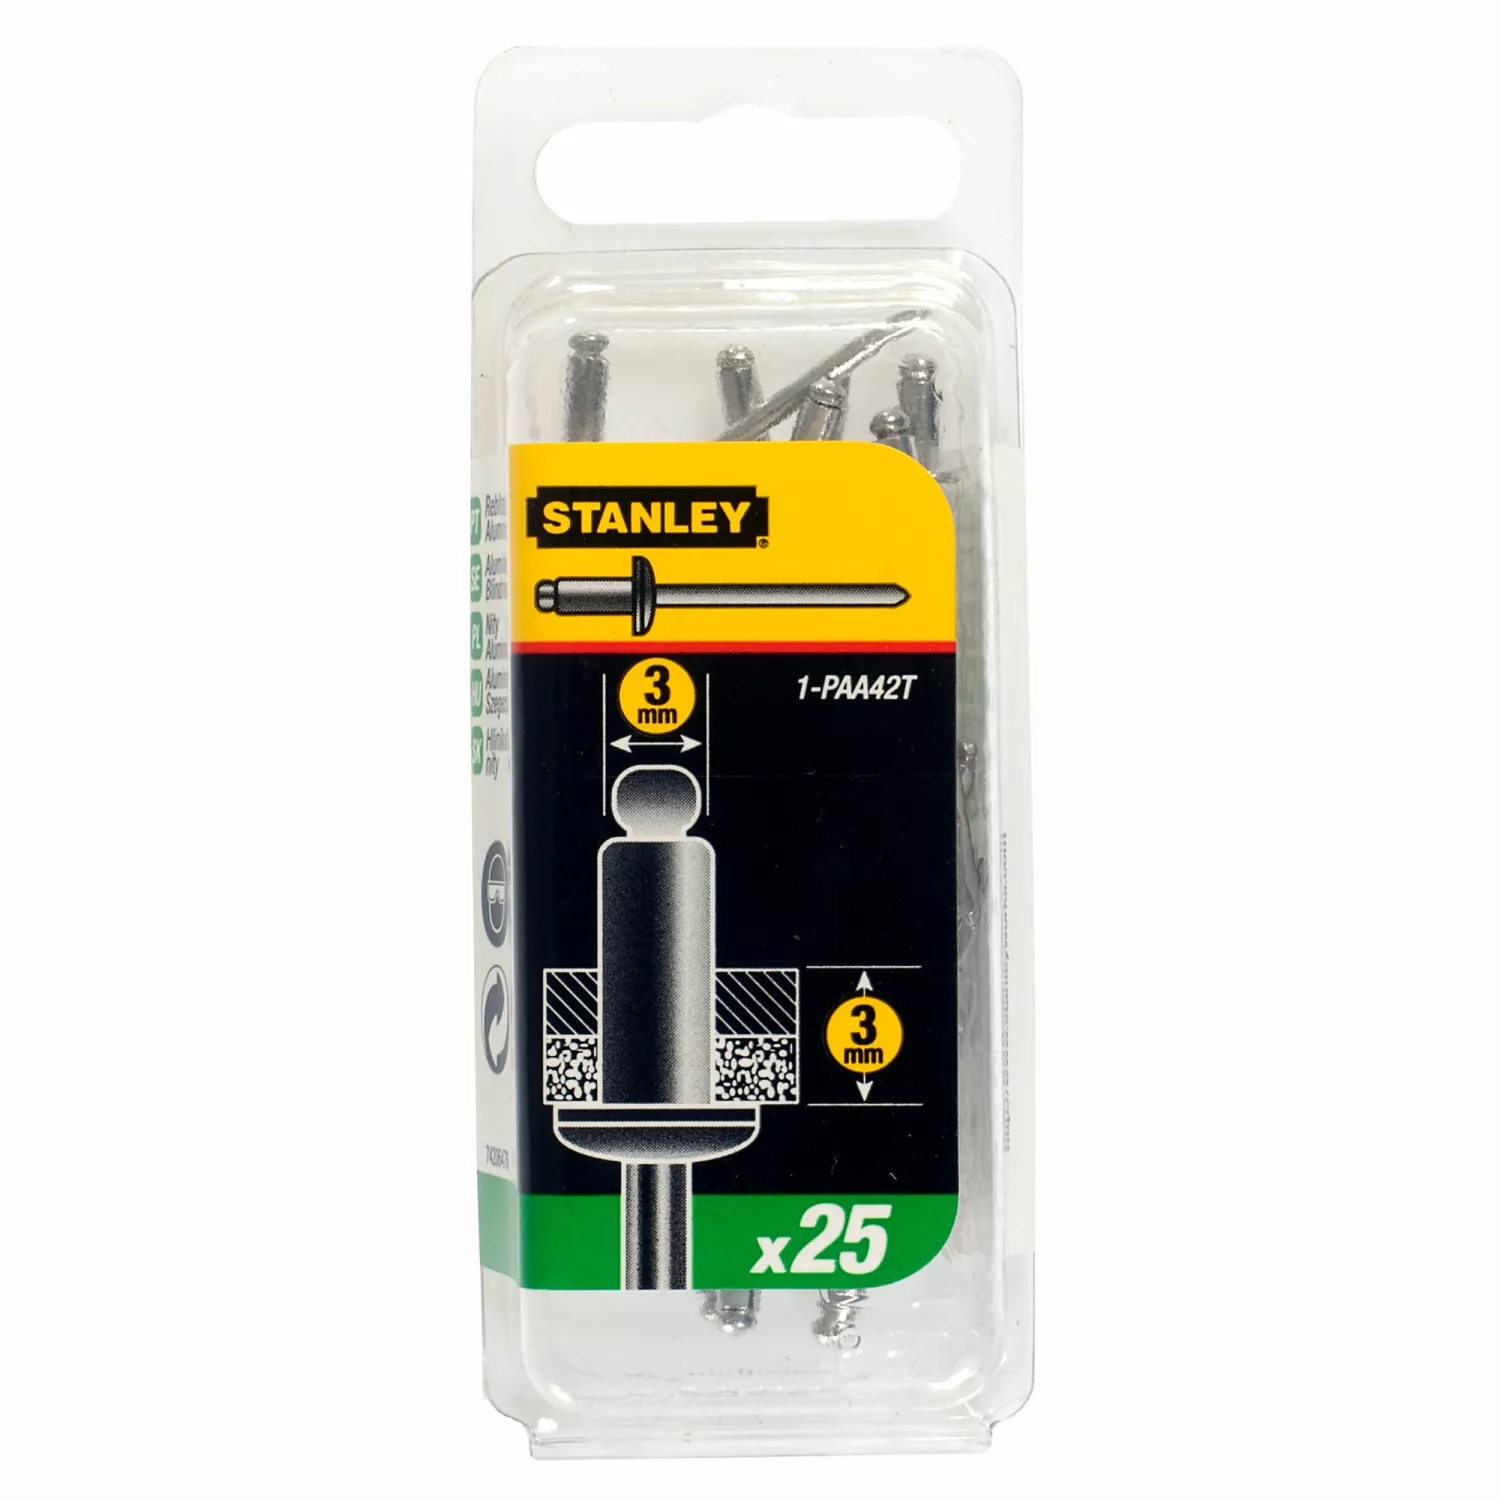 Stanley 1-PAA42T Popnagels - 3 x 3mm (25st)-image